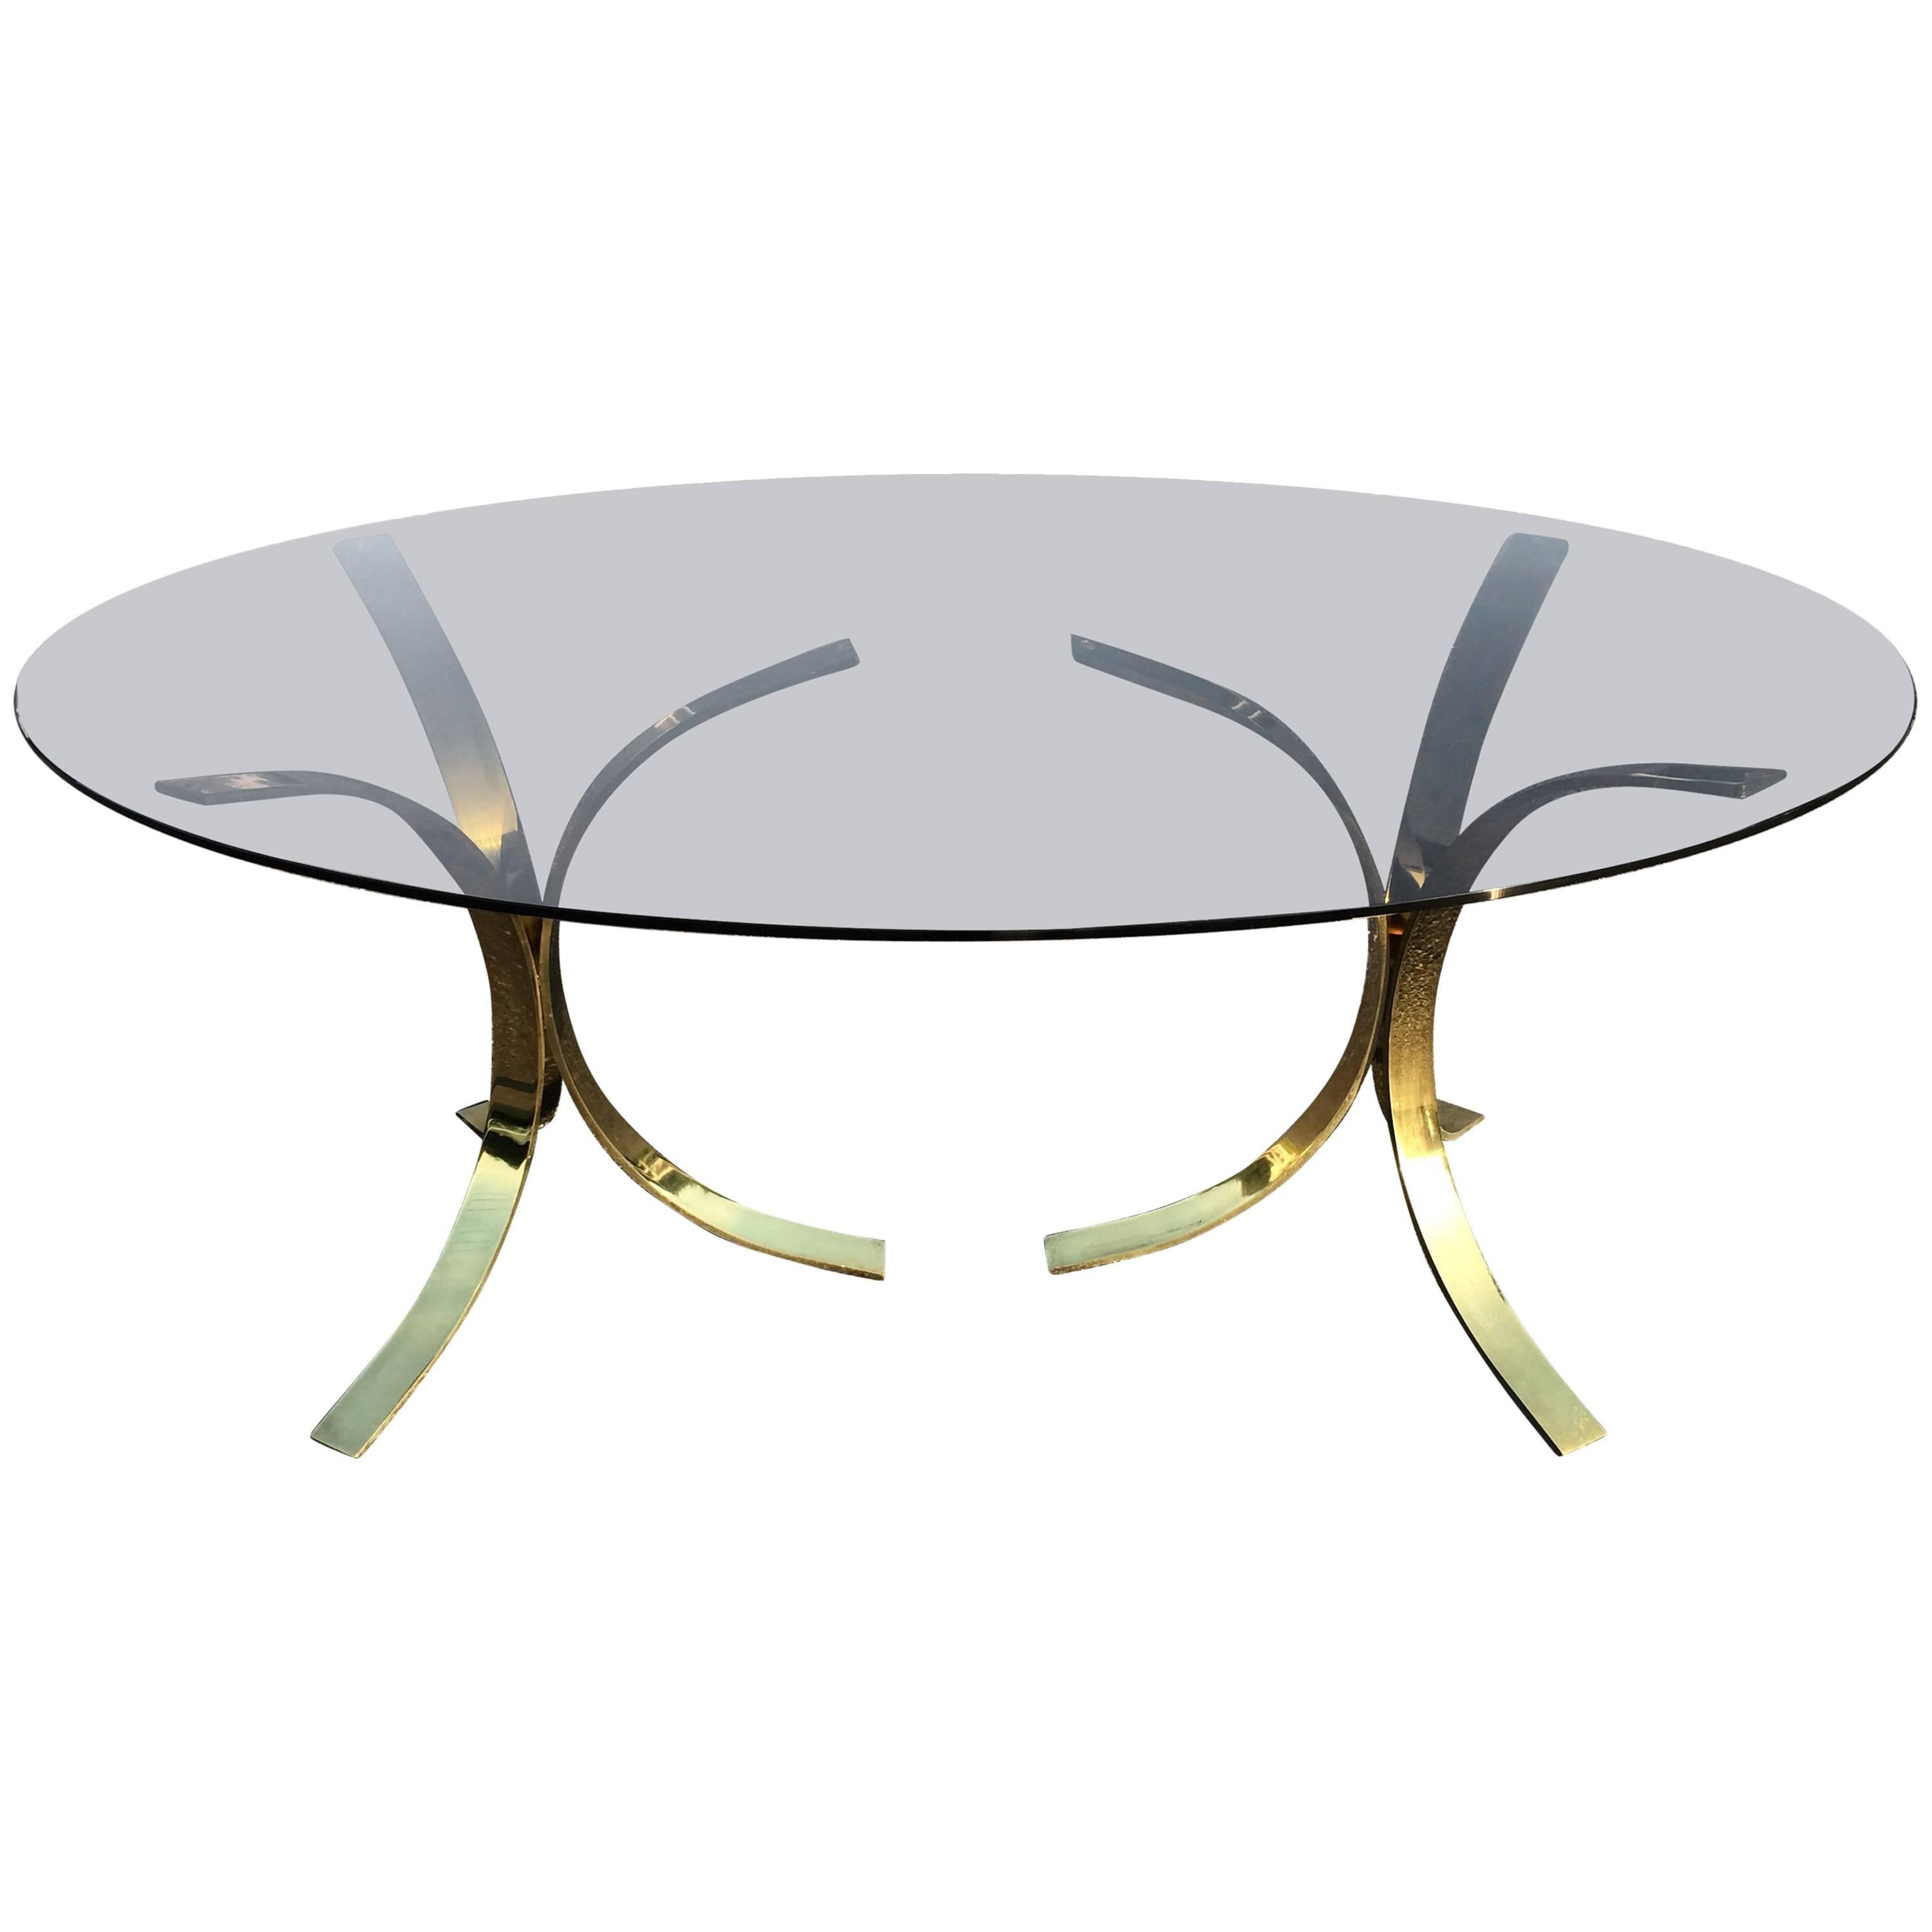 Roger Sprunger  Brass and Smoked Glass Oval Dining Table